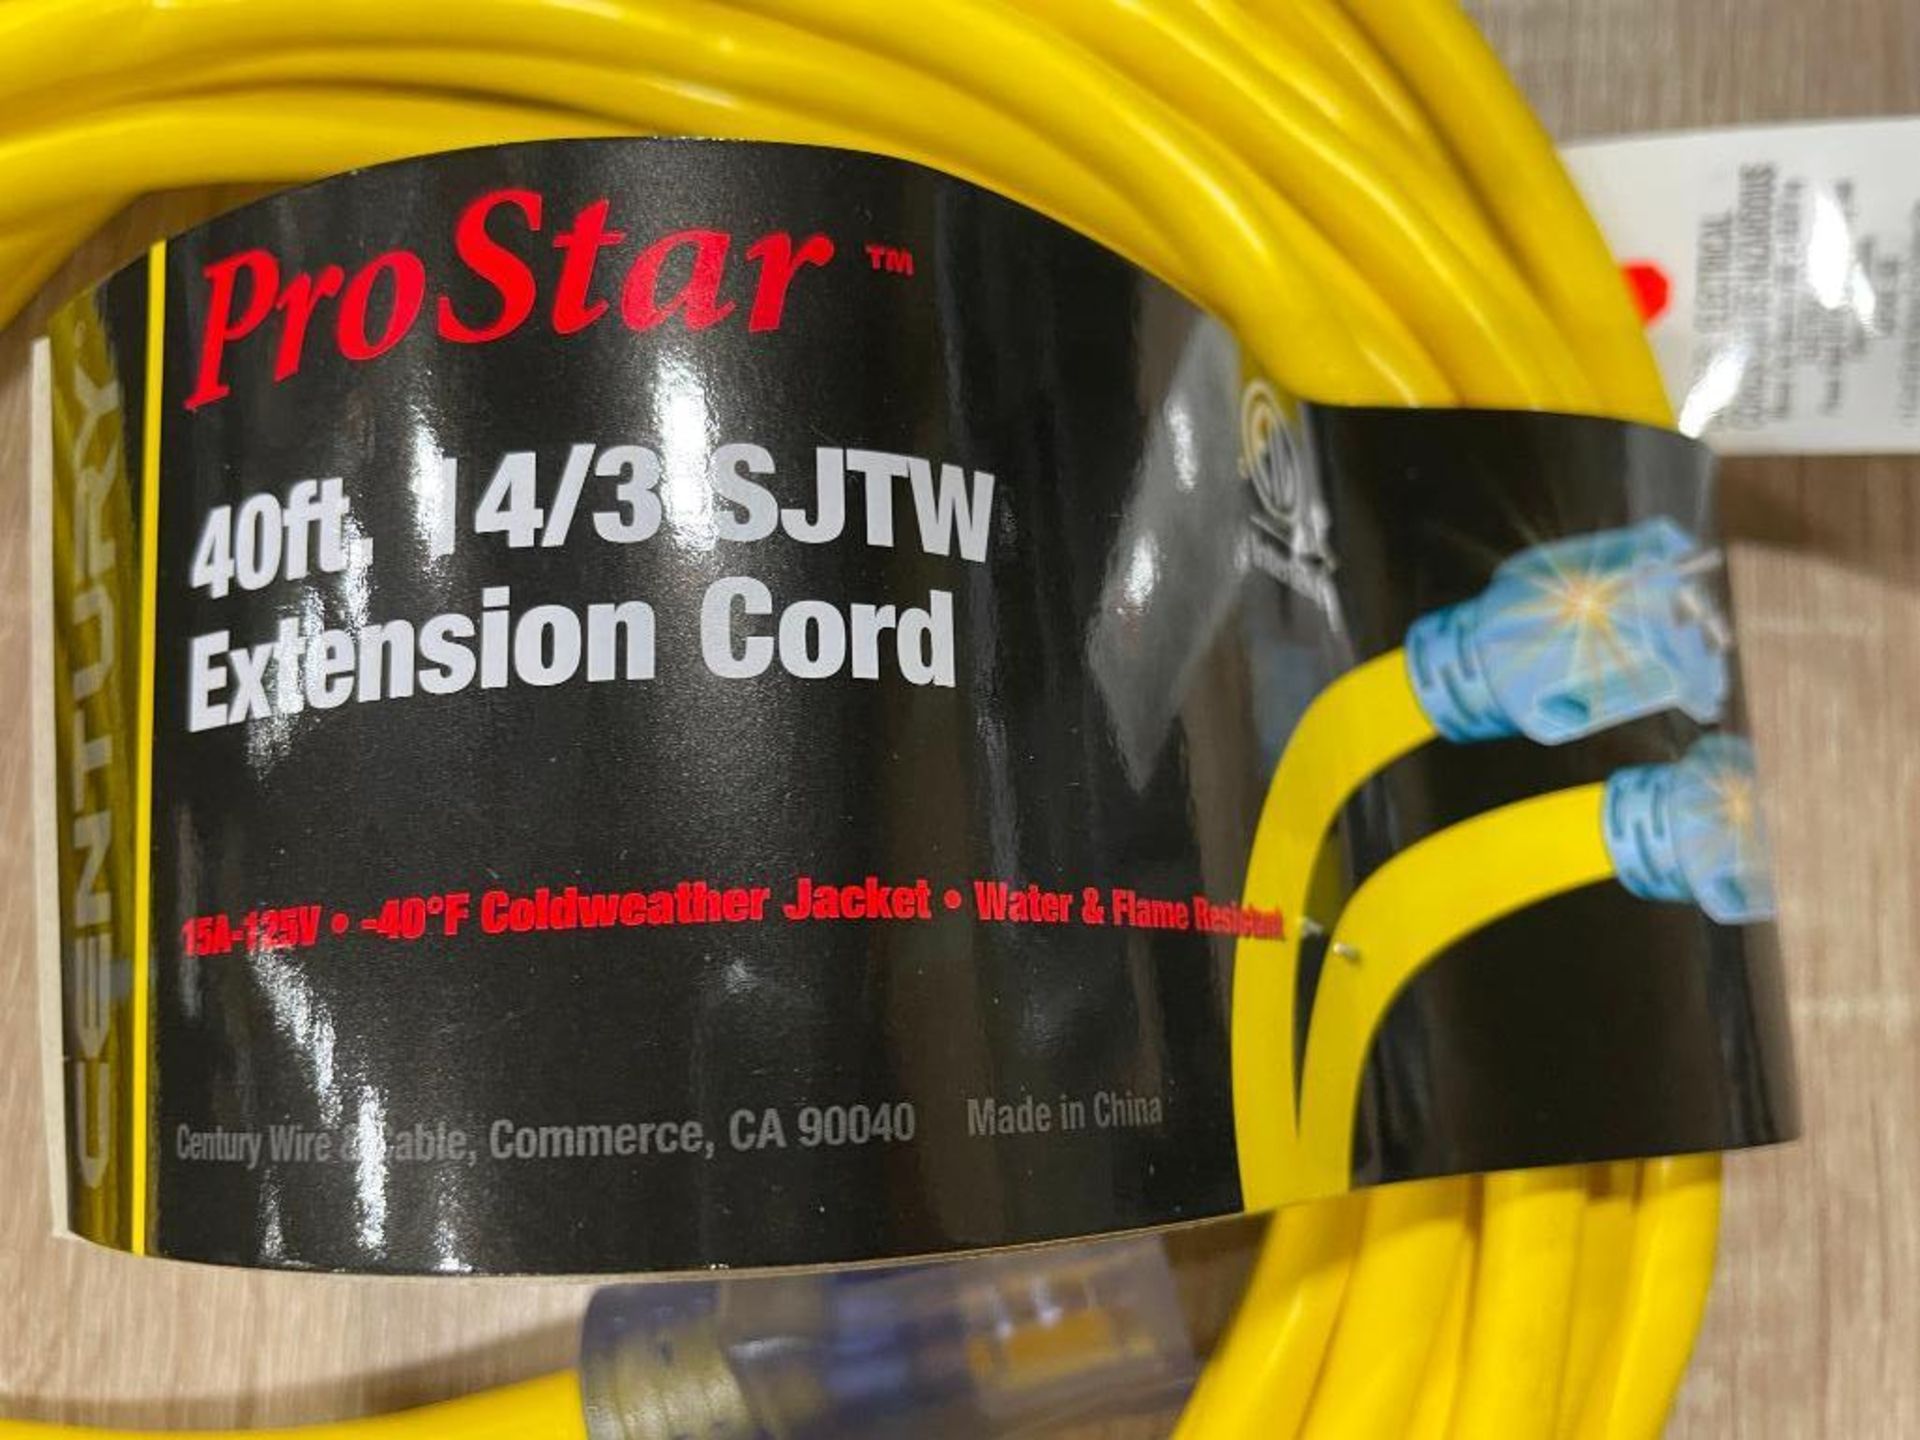 CENTURY, PRO STAR - 40' 14/3 SJTW EXTENSION CORD YELLOW - NEW - LOT OF 3 - Image 2 of 3